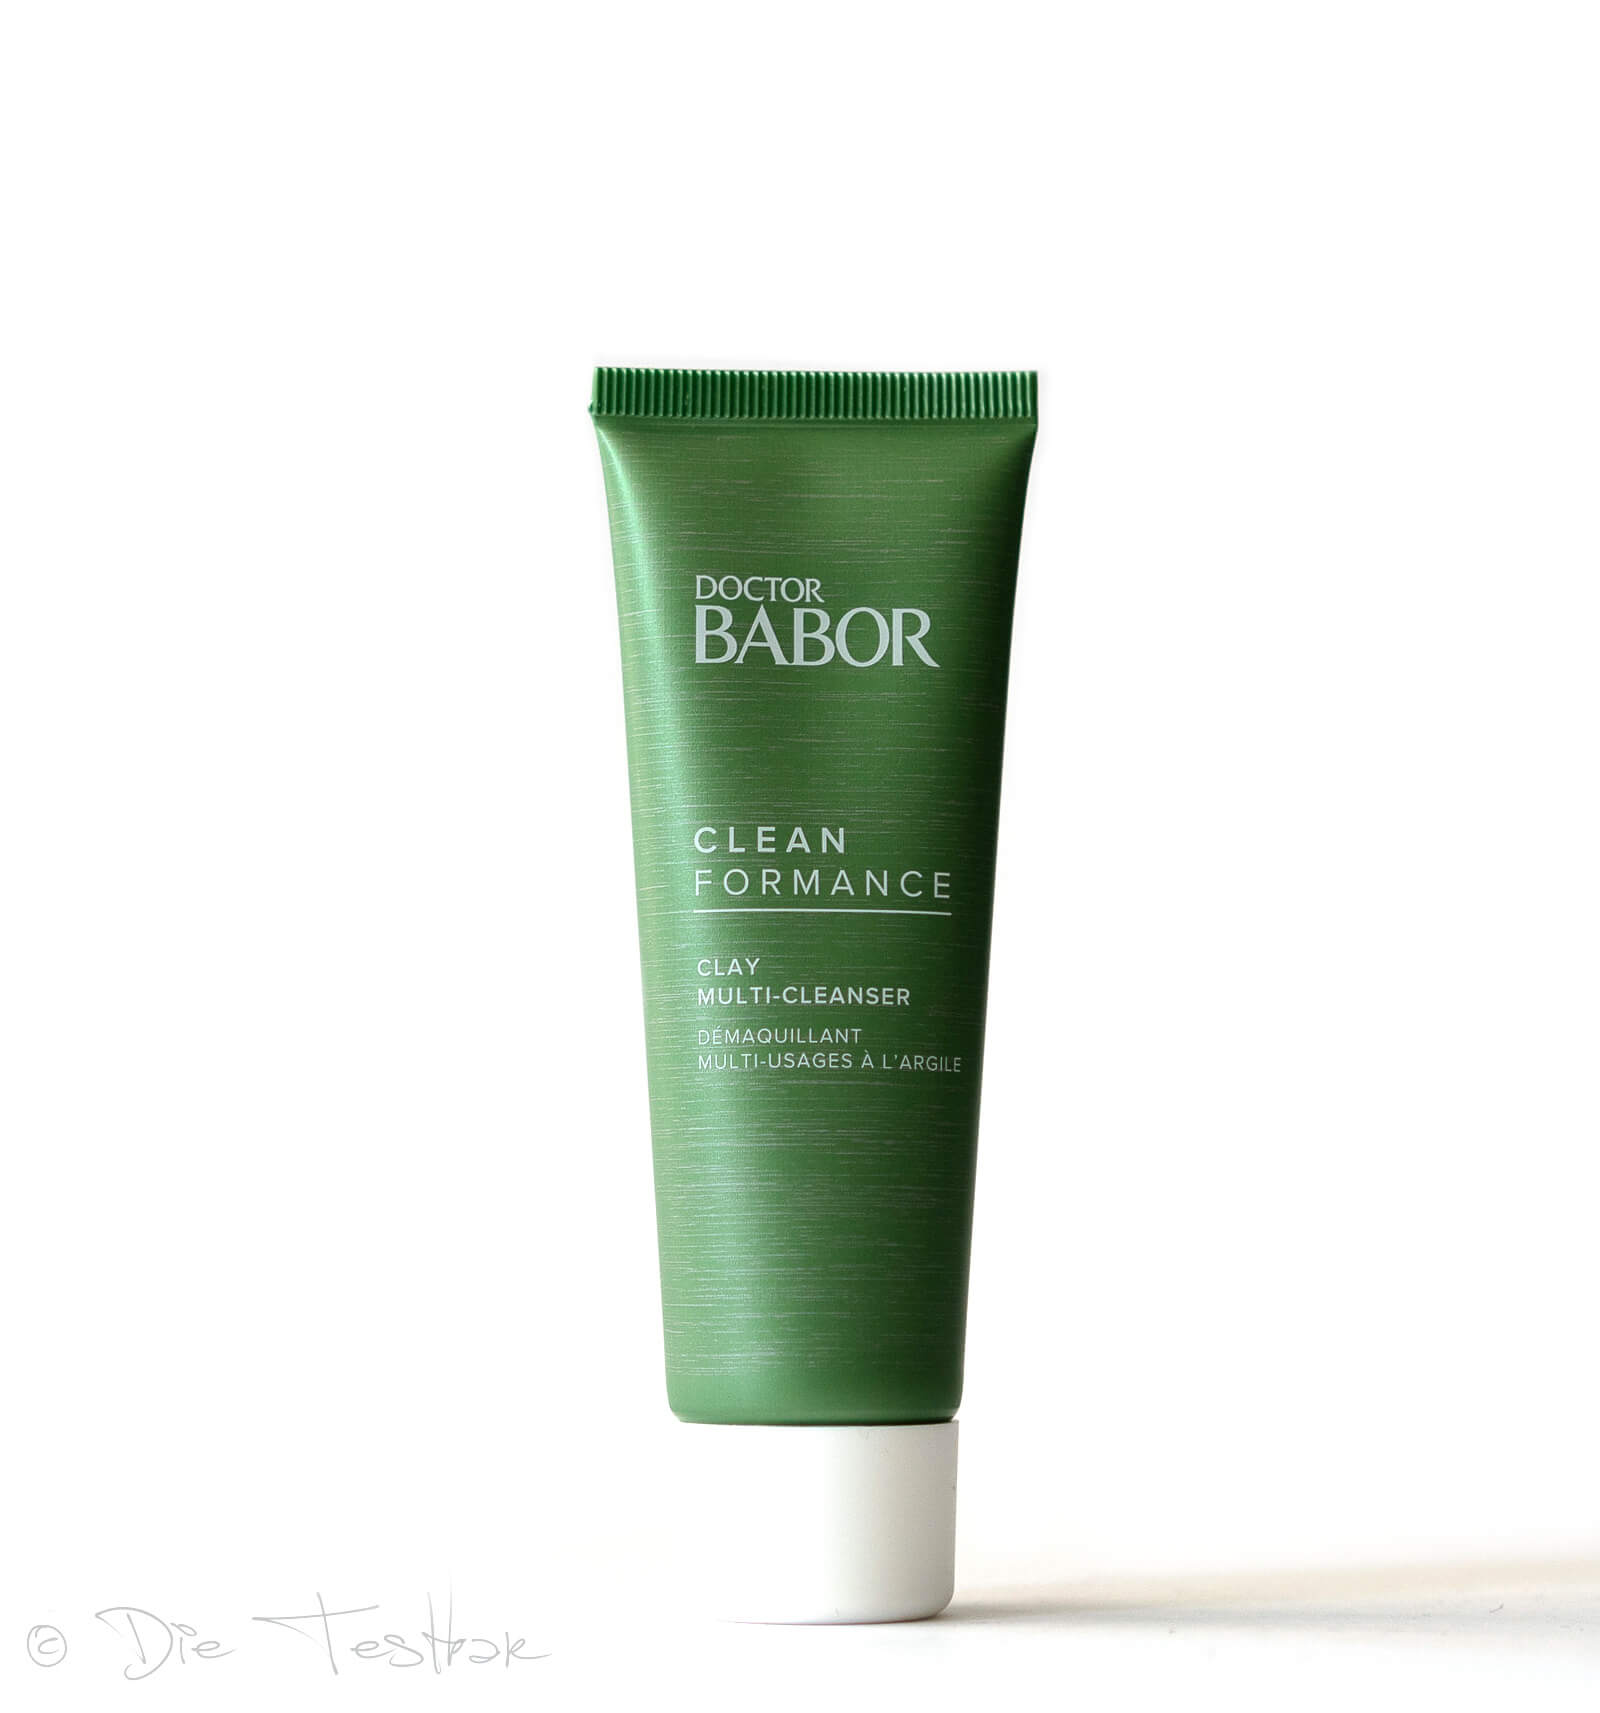 DOCTOR BABOR - CLEANFORMANCE - Clay Multi-Cleanser